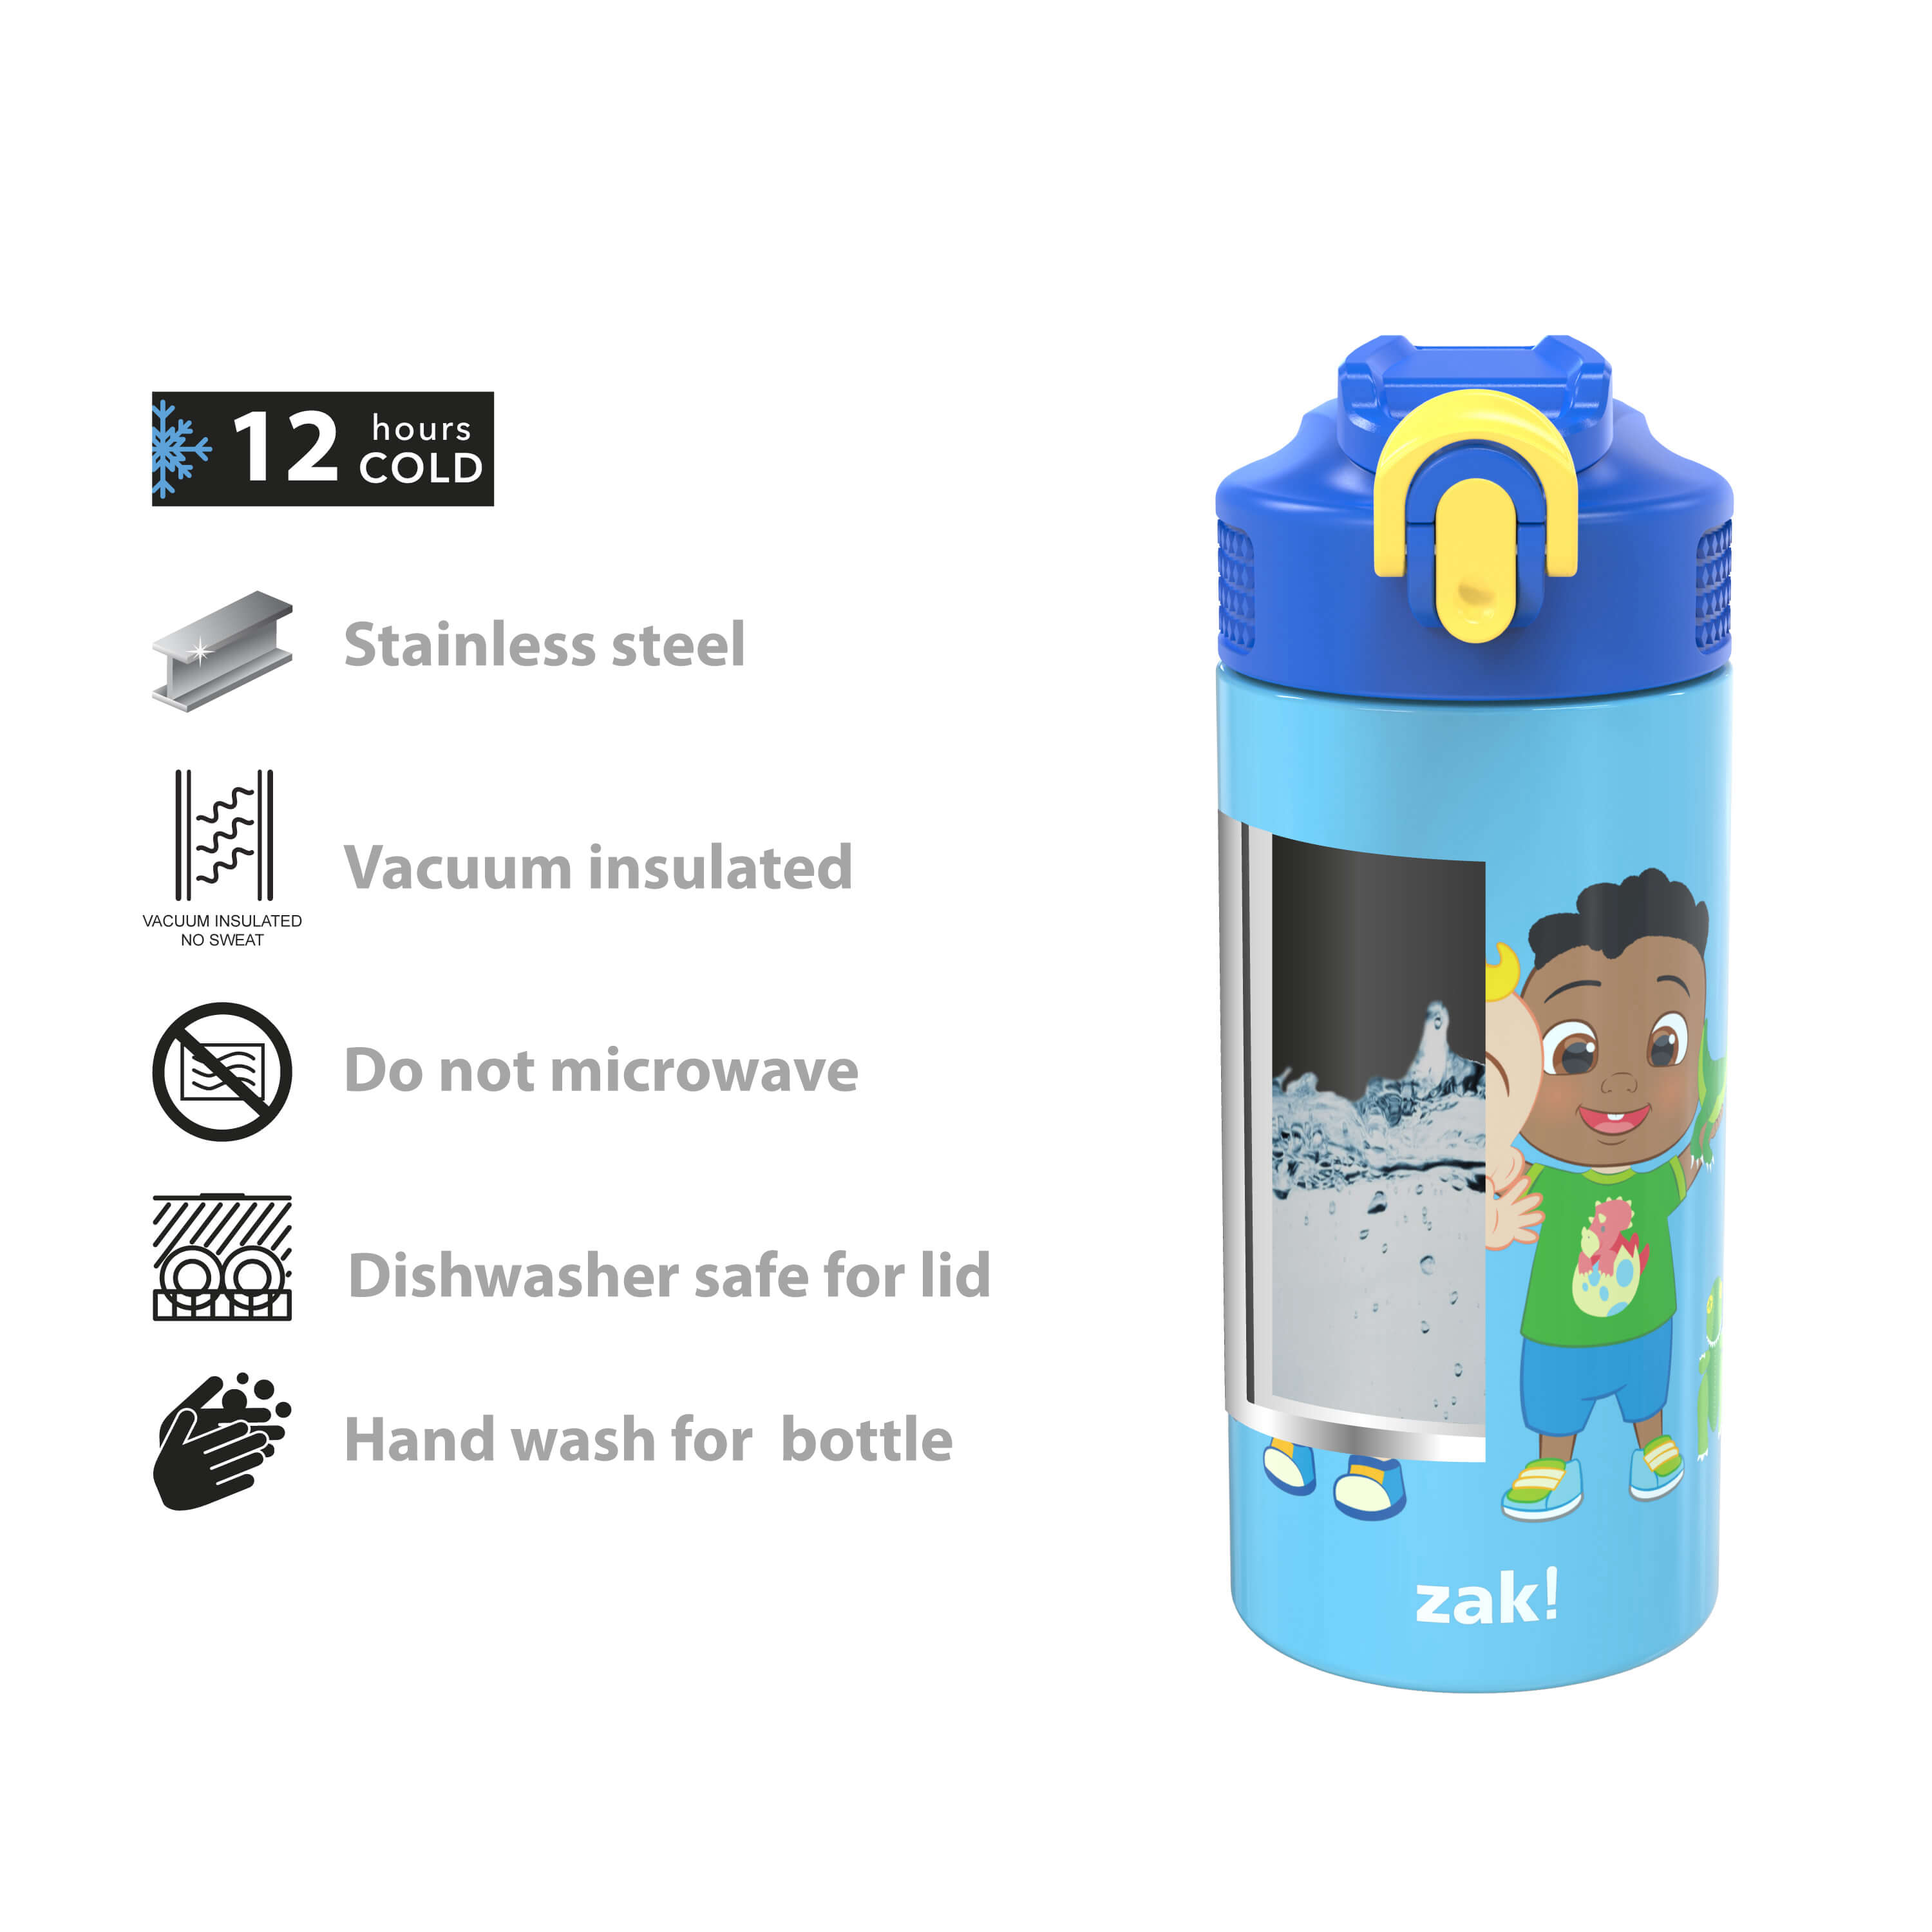 Zak Designs CoComelon Kids Water Bottle with Spout Cover and Built-in  Carrying Loop, Made of Durable…See more Zak Designs CoComelon Kids Water  Bottle